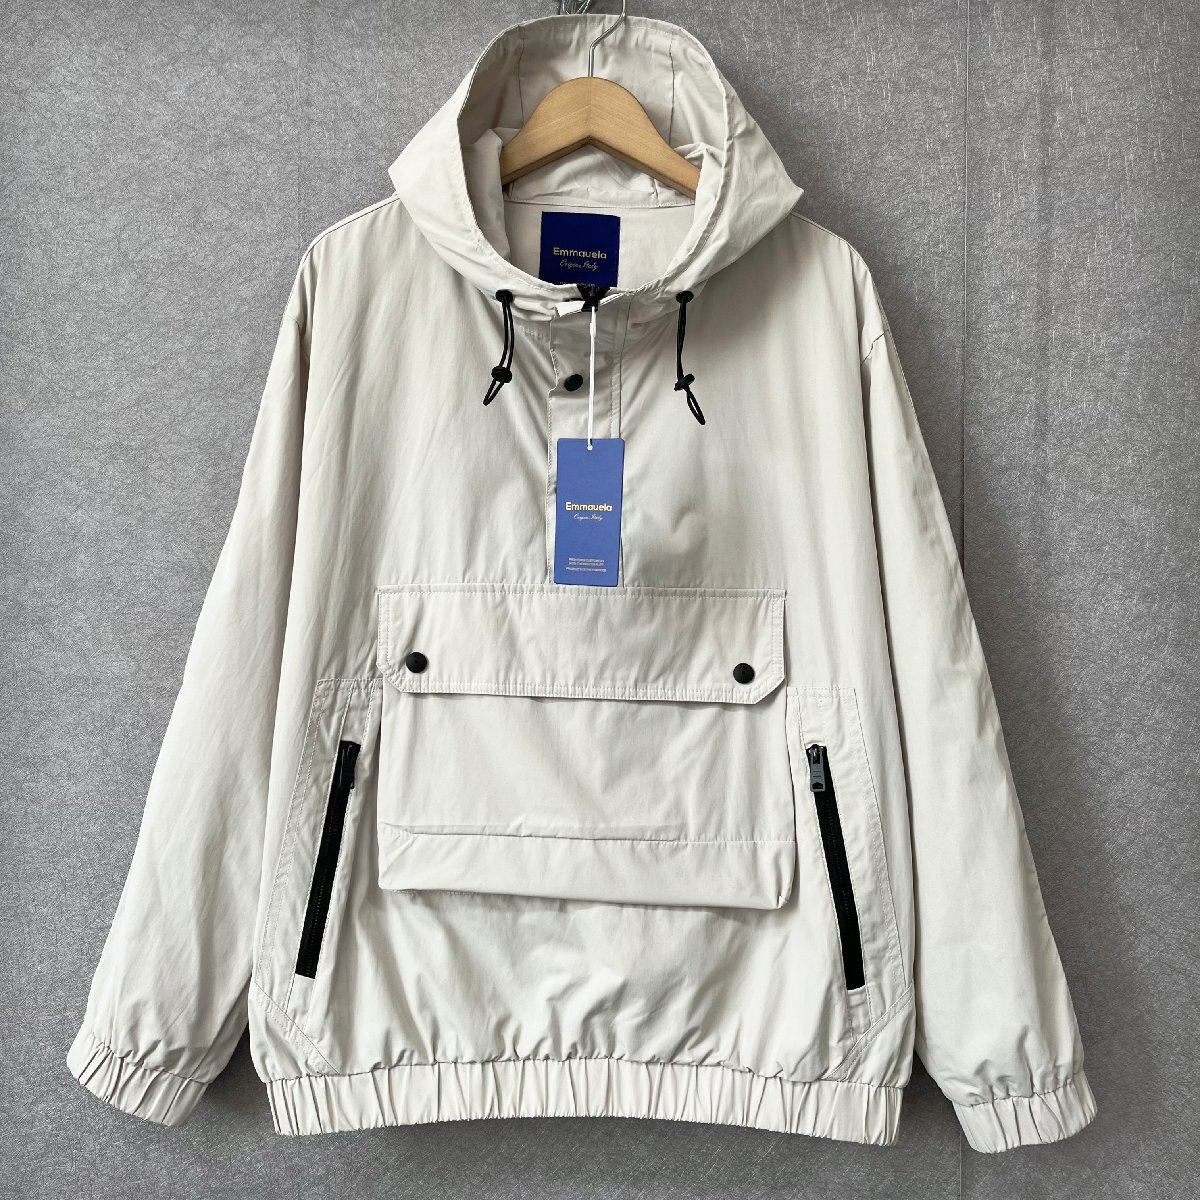 ** standard * Parker regular price 3 ten thousand *Emmauela* Italy * milano departure * on shortage of stock hand piece . ventilation pull over . manner outer f-ti- unisex M